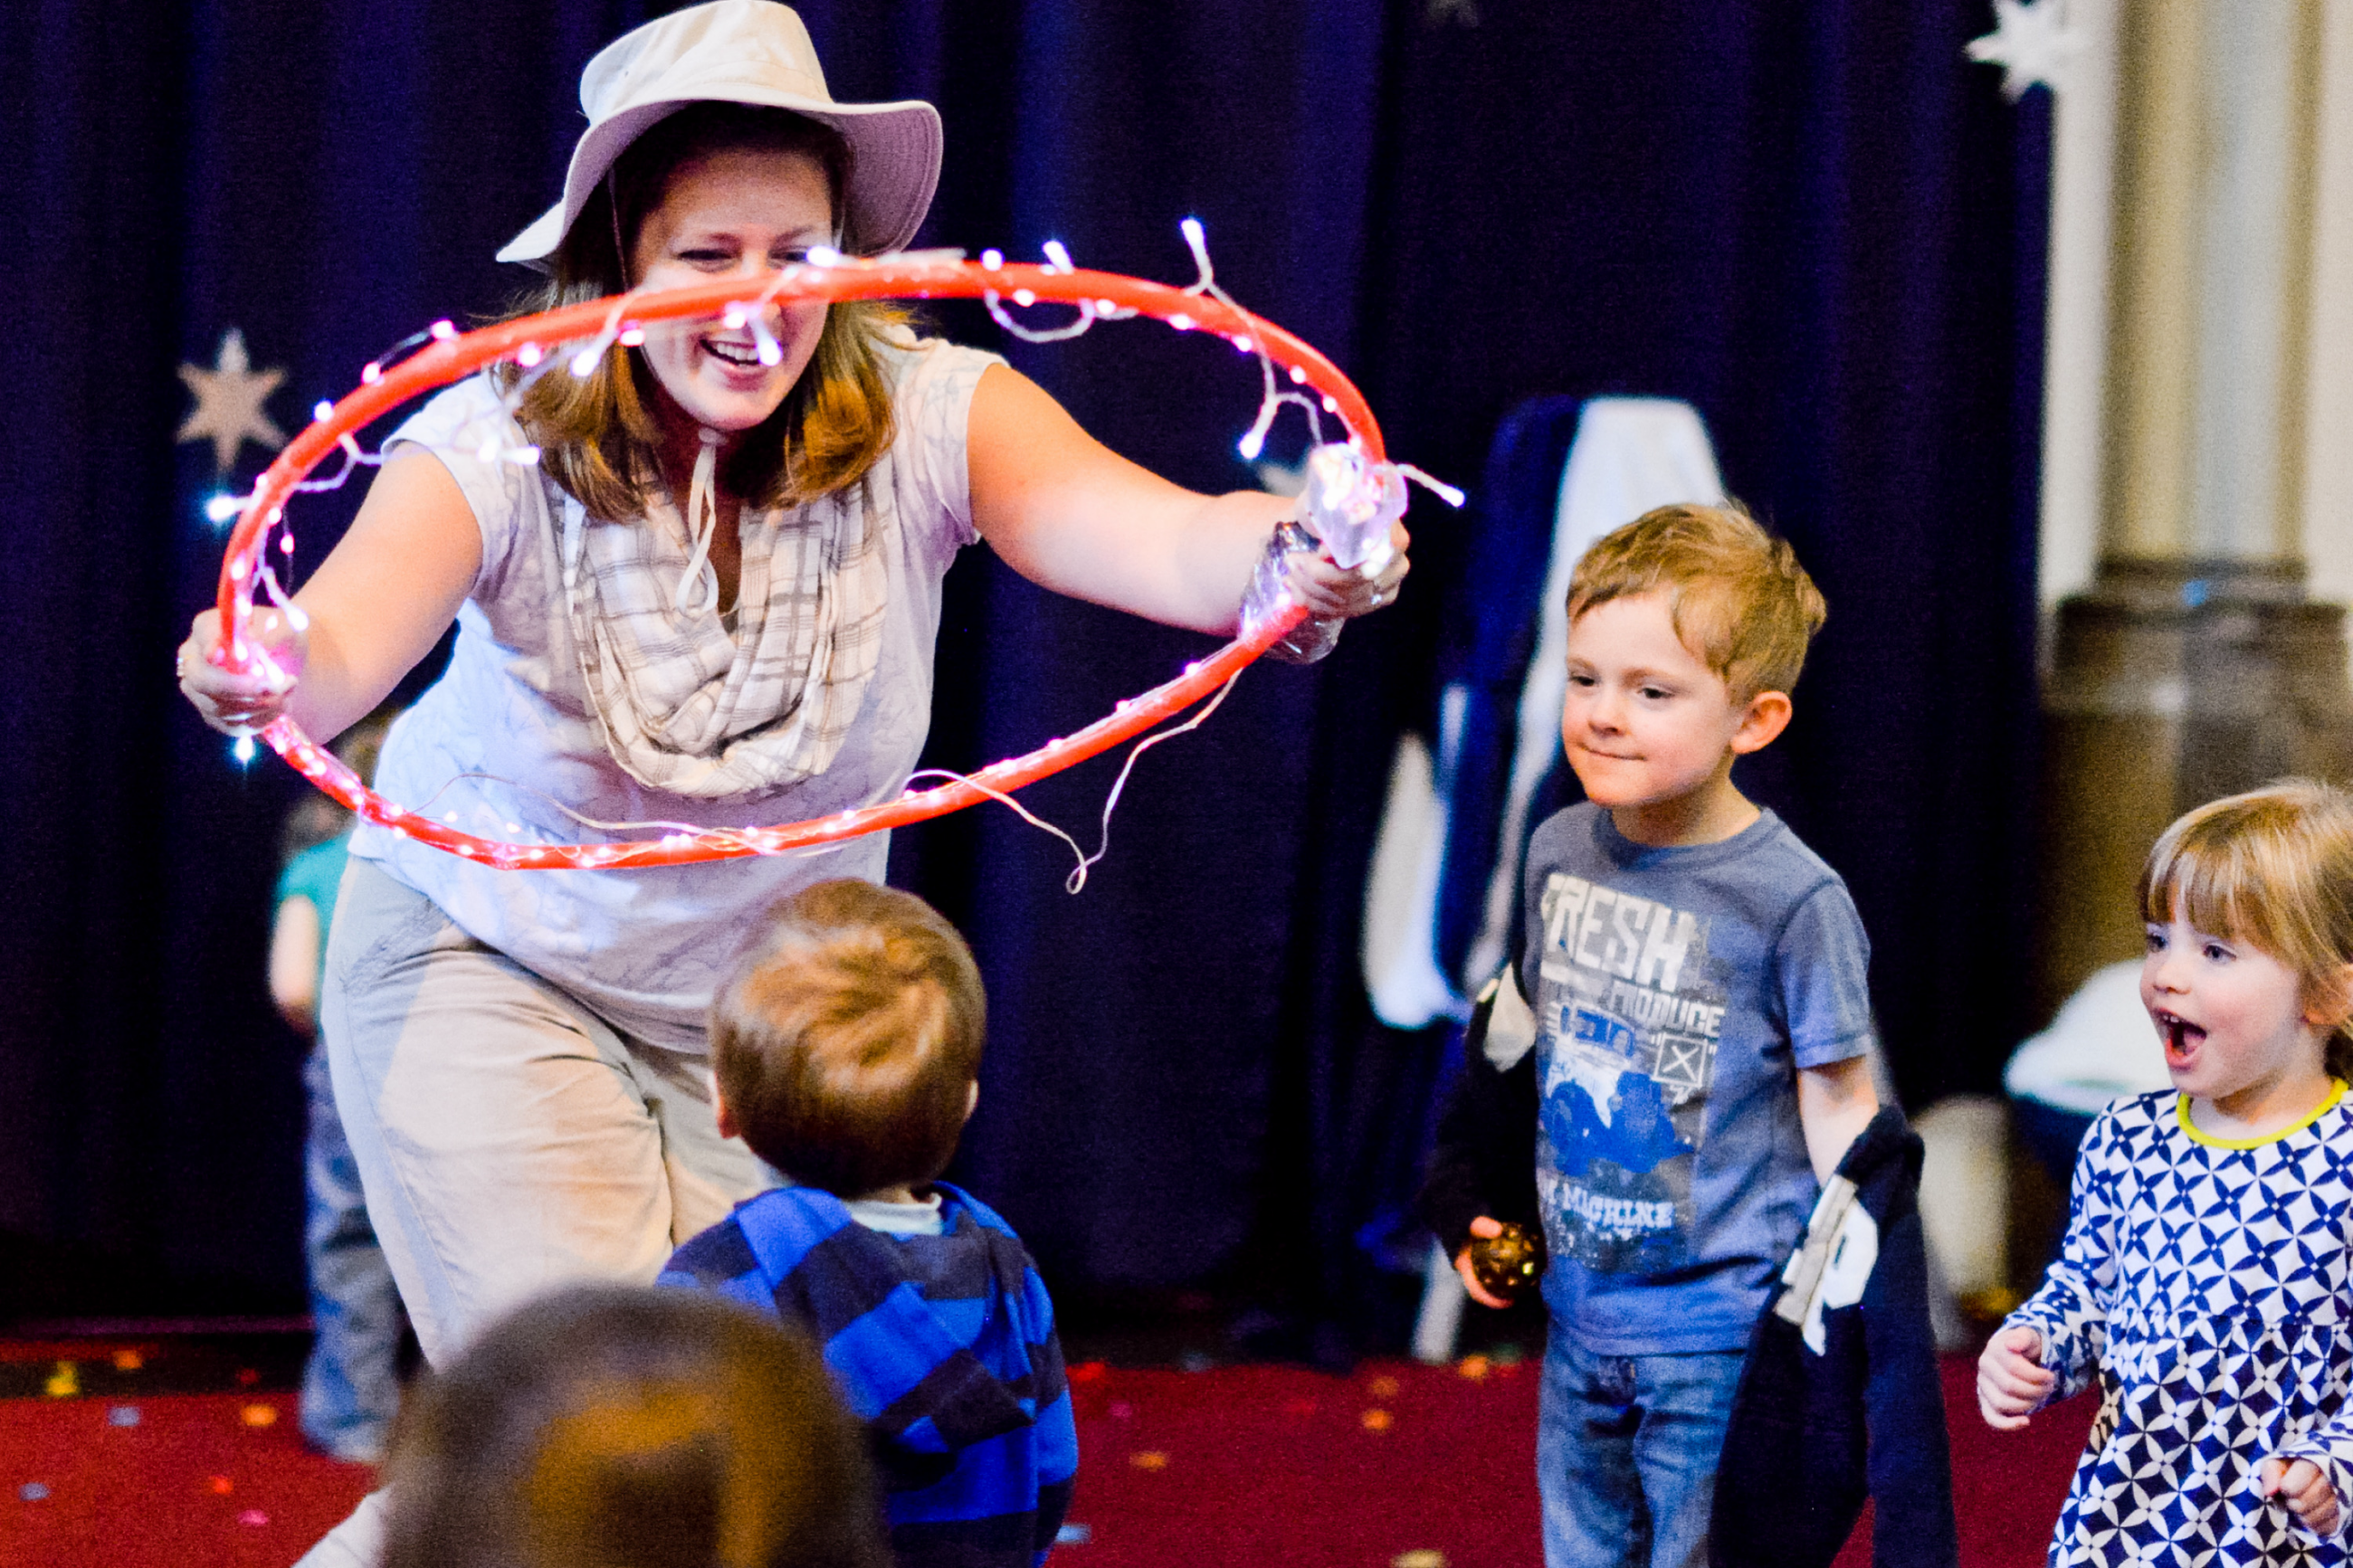 A smiling performance member in costume places a hula hoop with string lights on a young child.